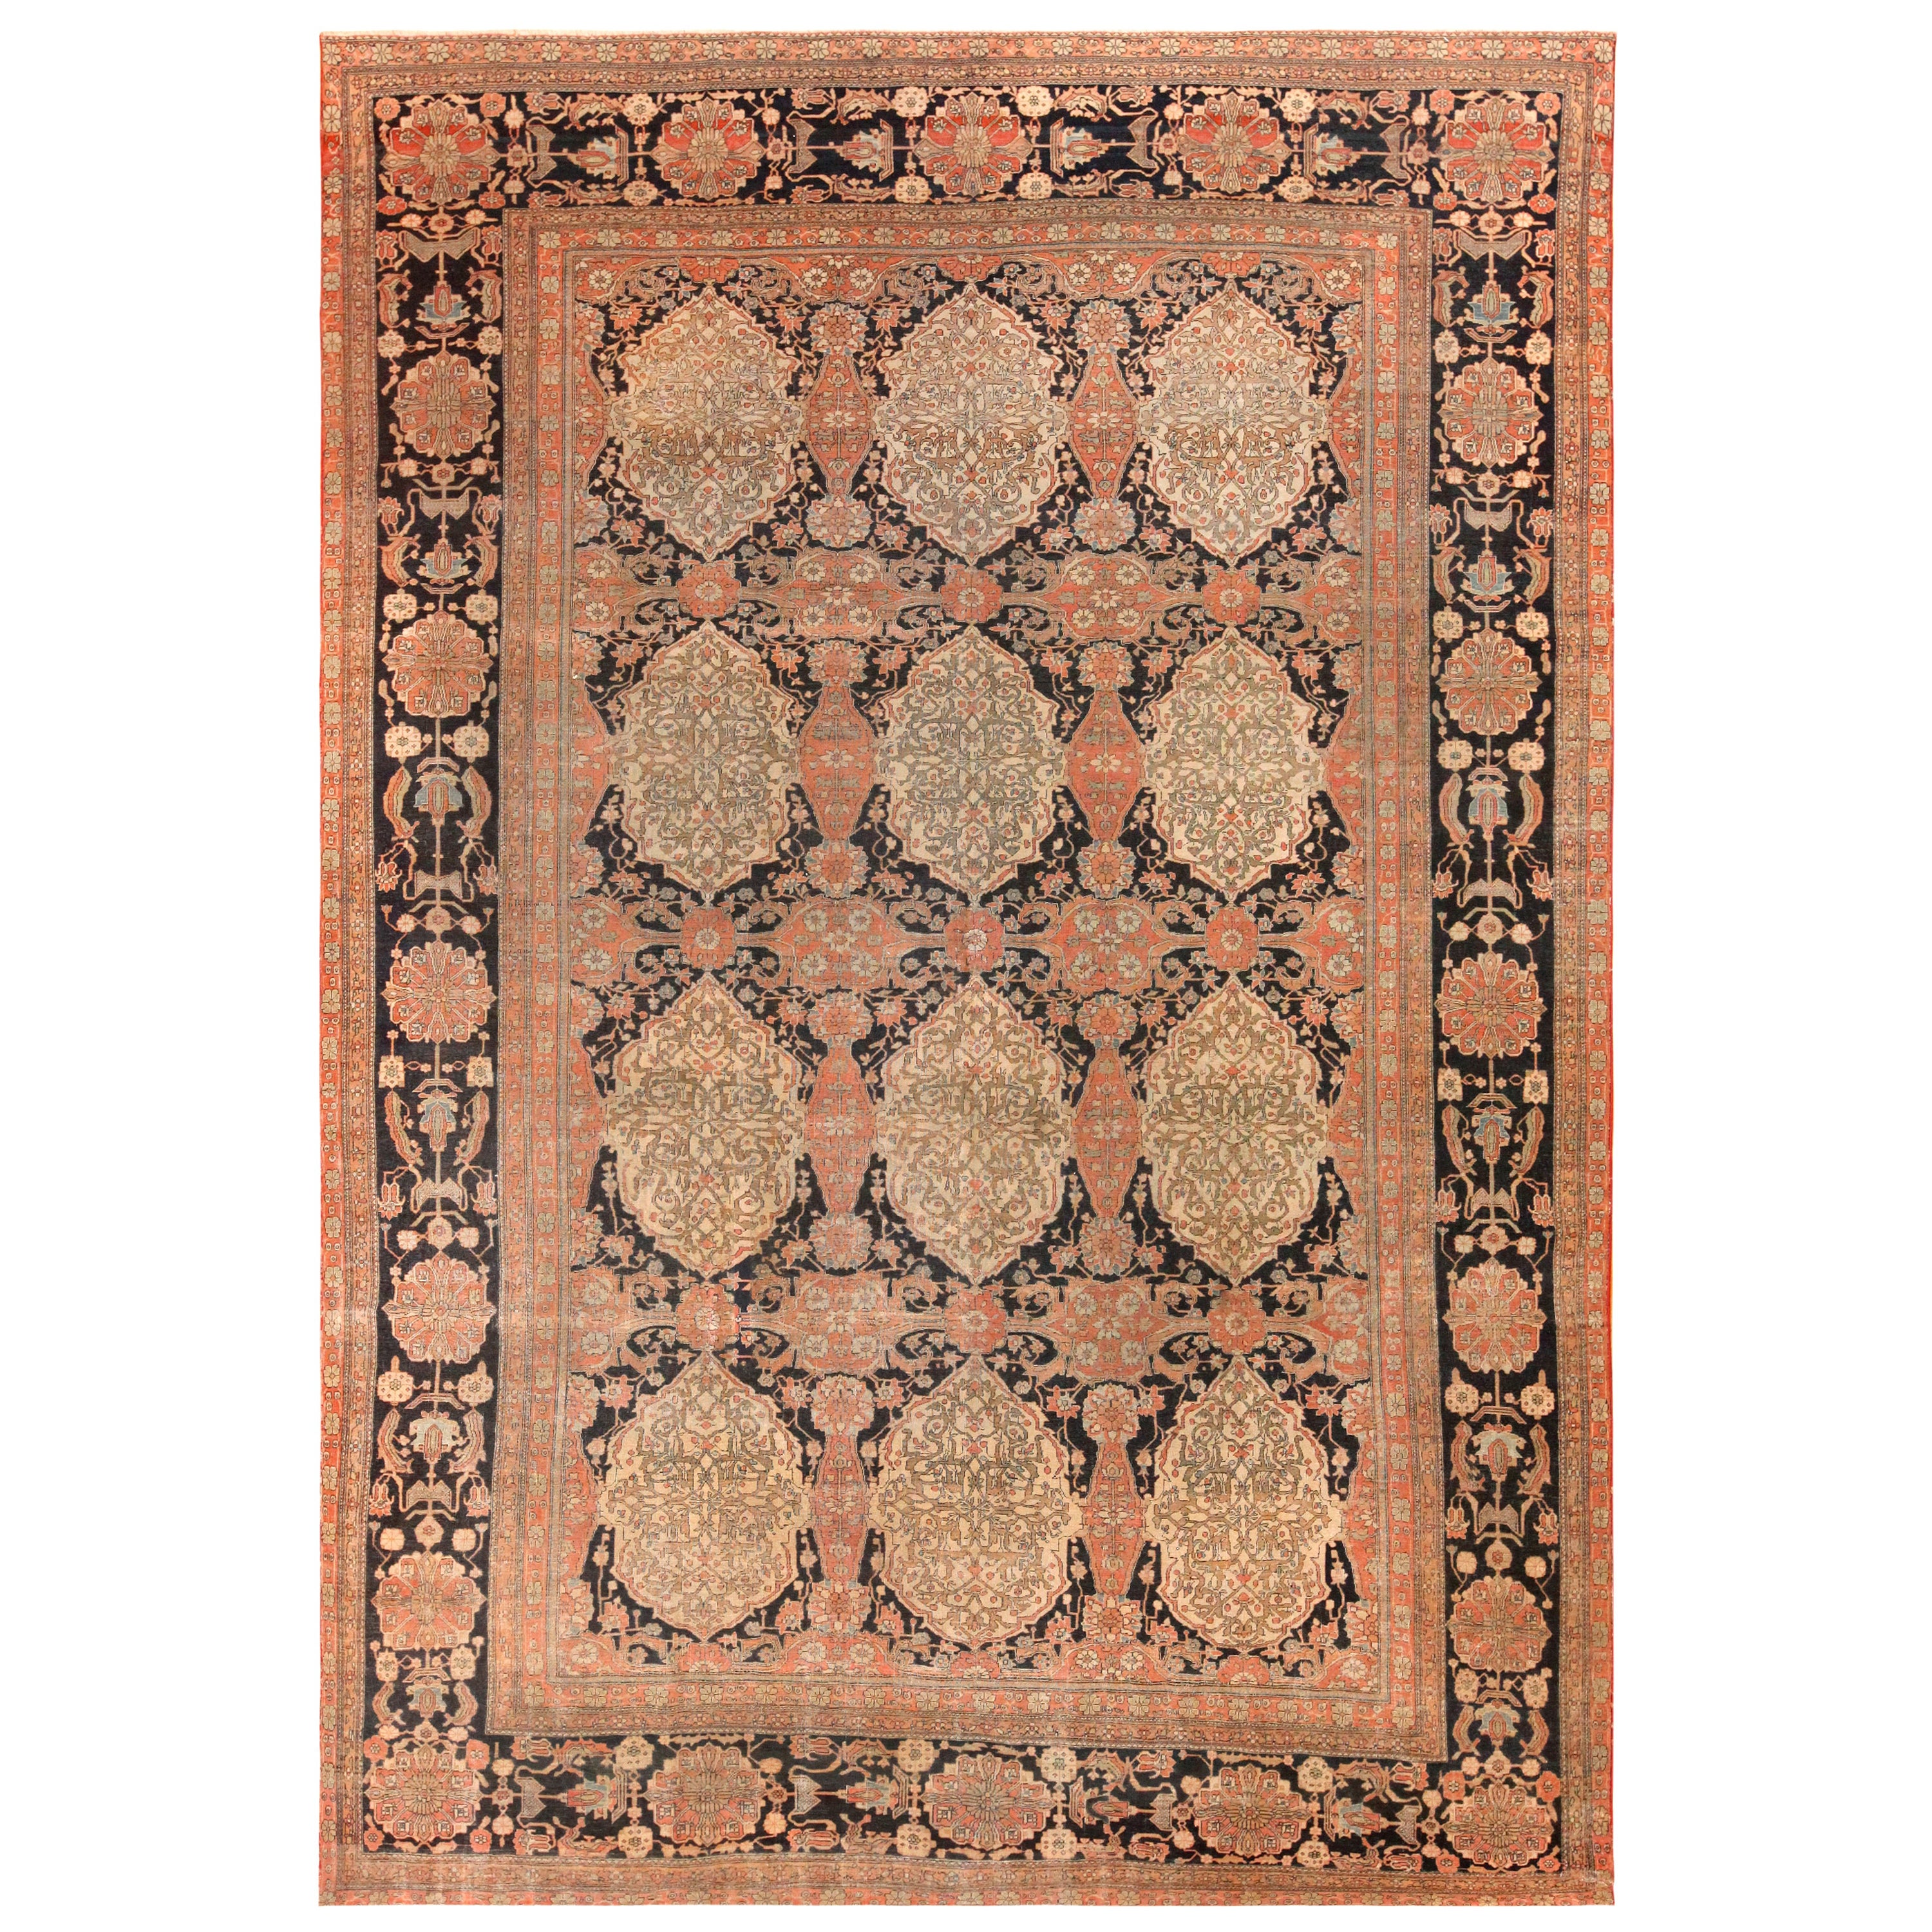 Kashan Rugs and Carpets